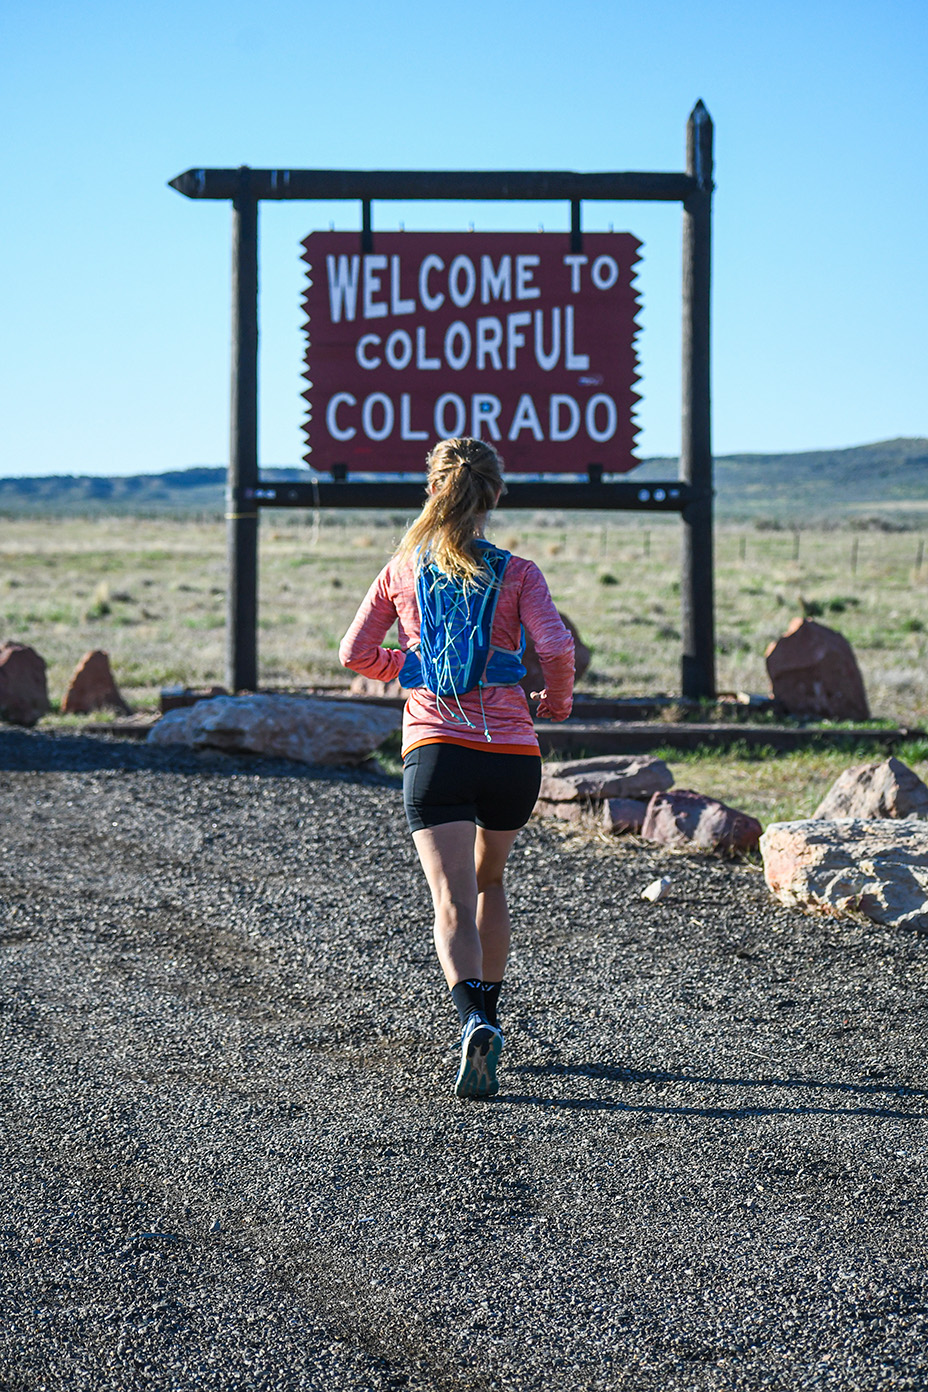 Meghan Guhler 鈥�16 running with back to the camera sign in front of her that says Welcome to Colorado